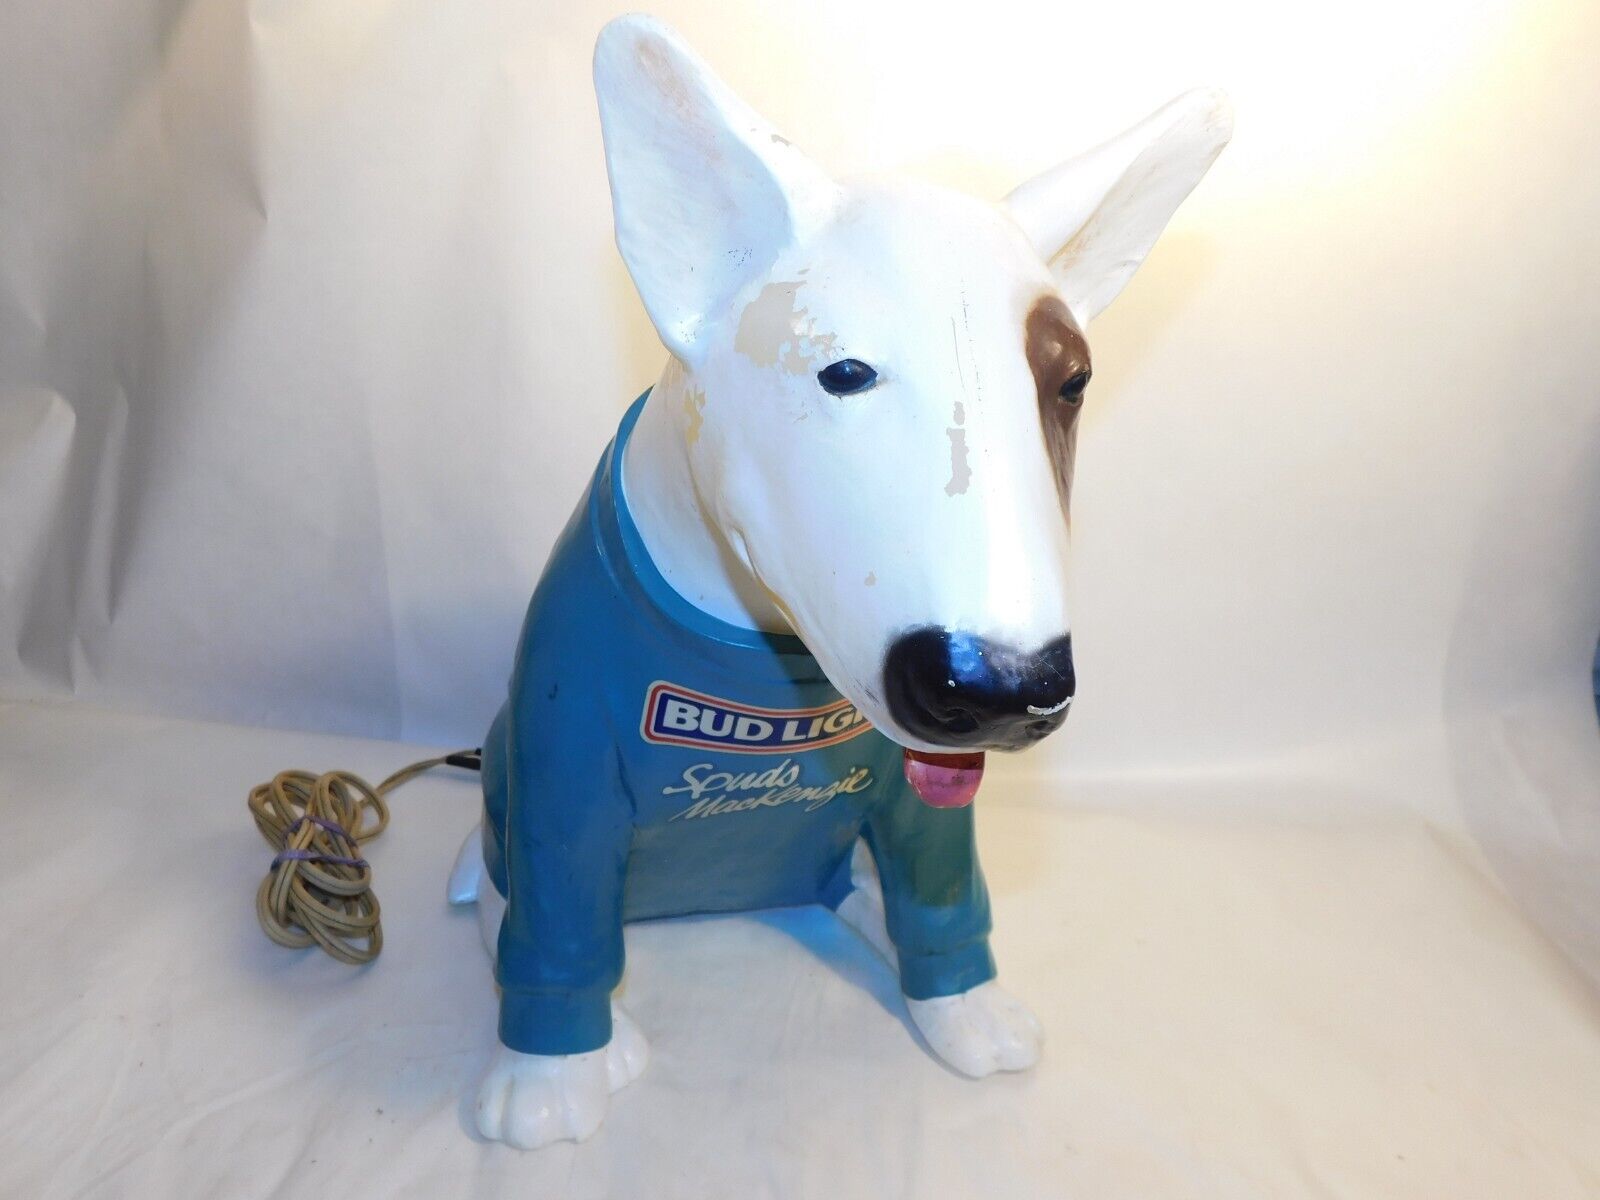 Vintage 1986 Bud Light Spuds Mackenzie Blow Mold Bar Lamp Working (replaced cord